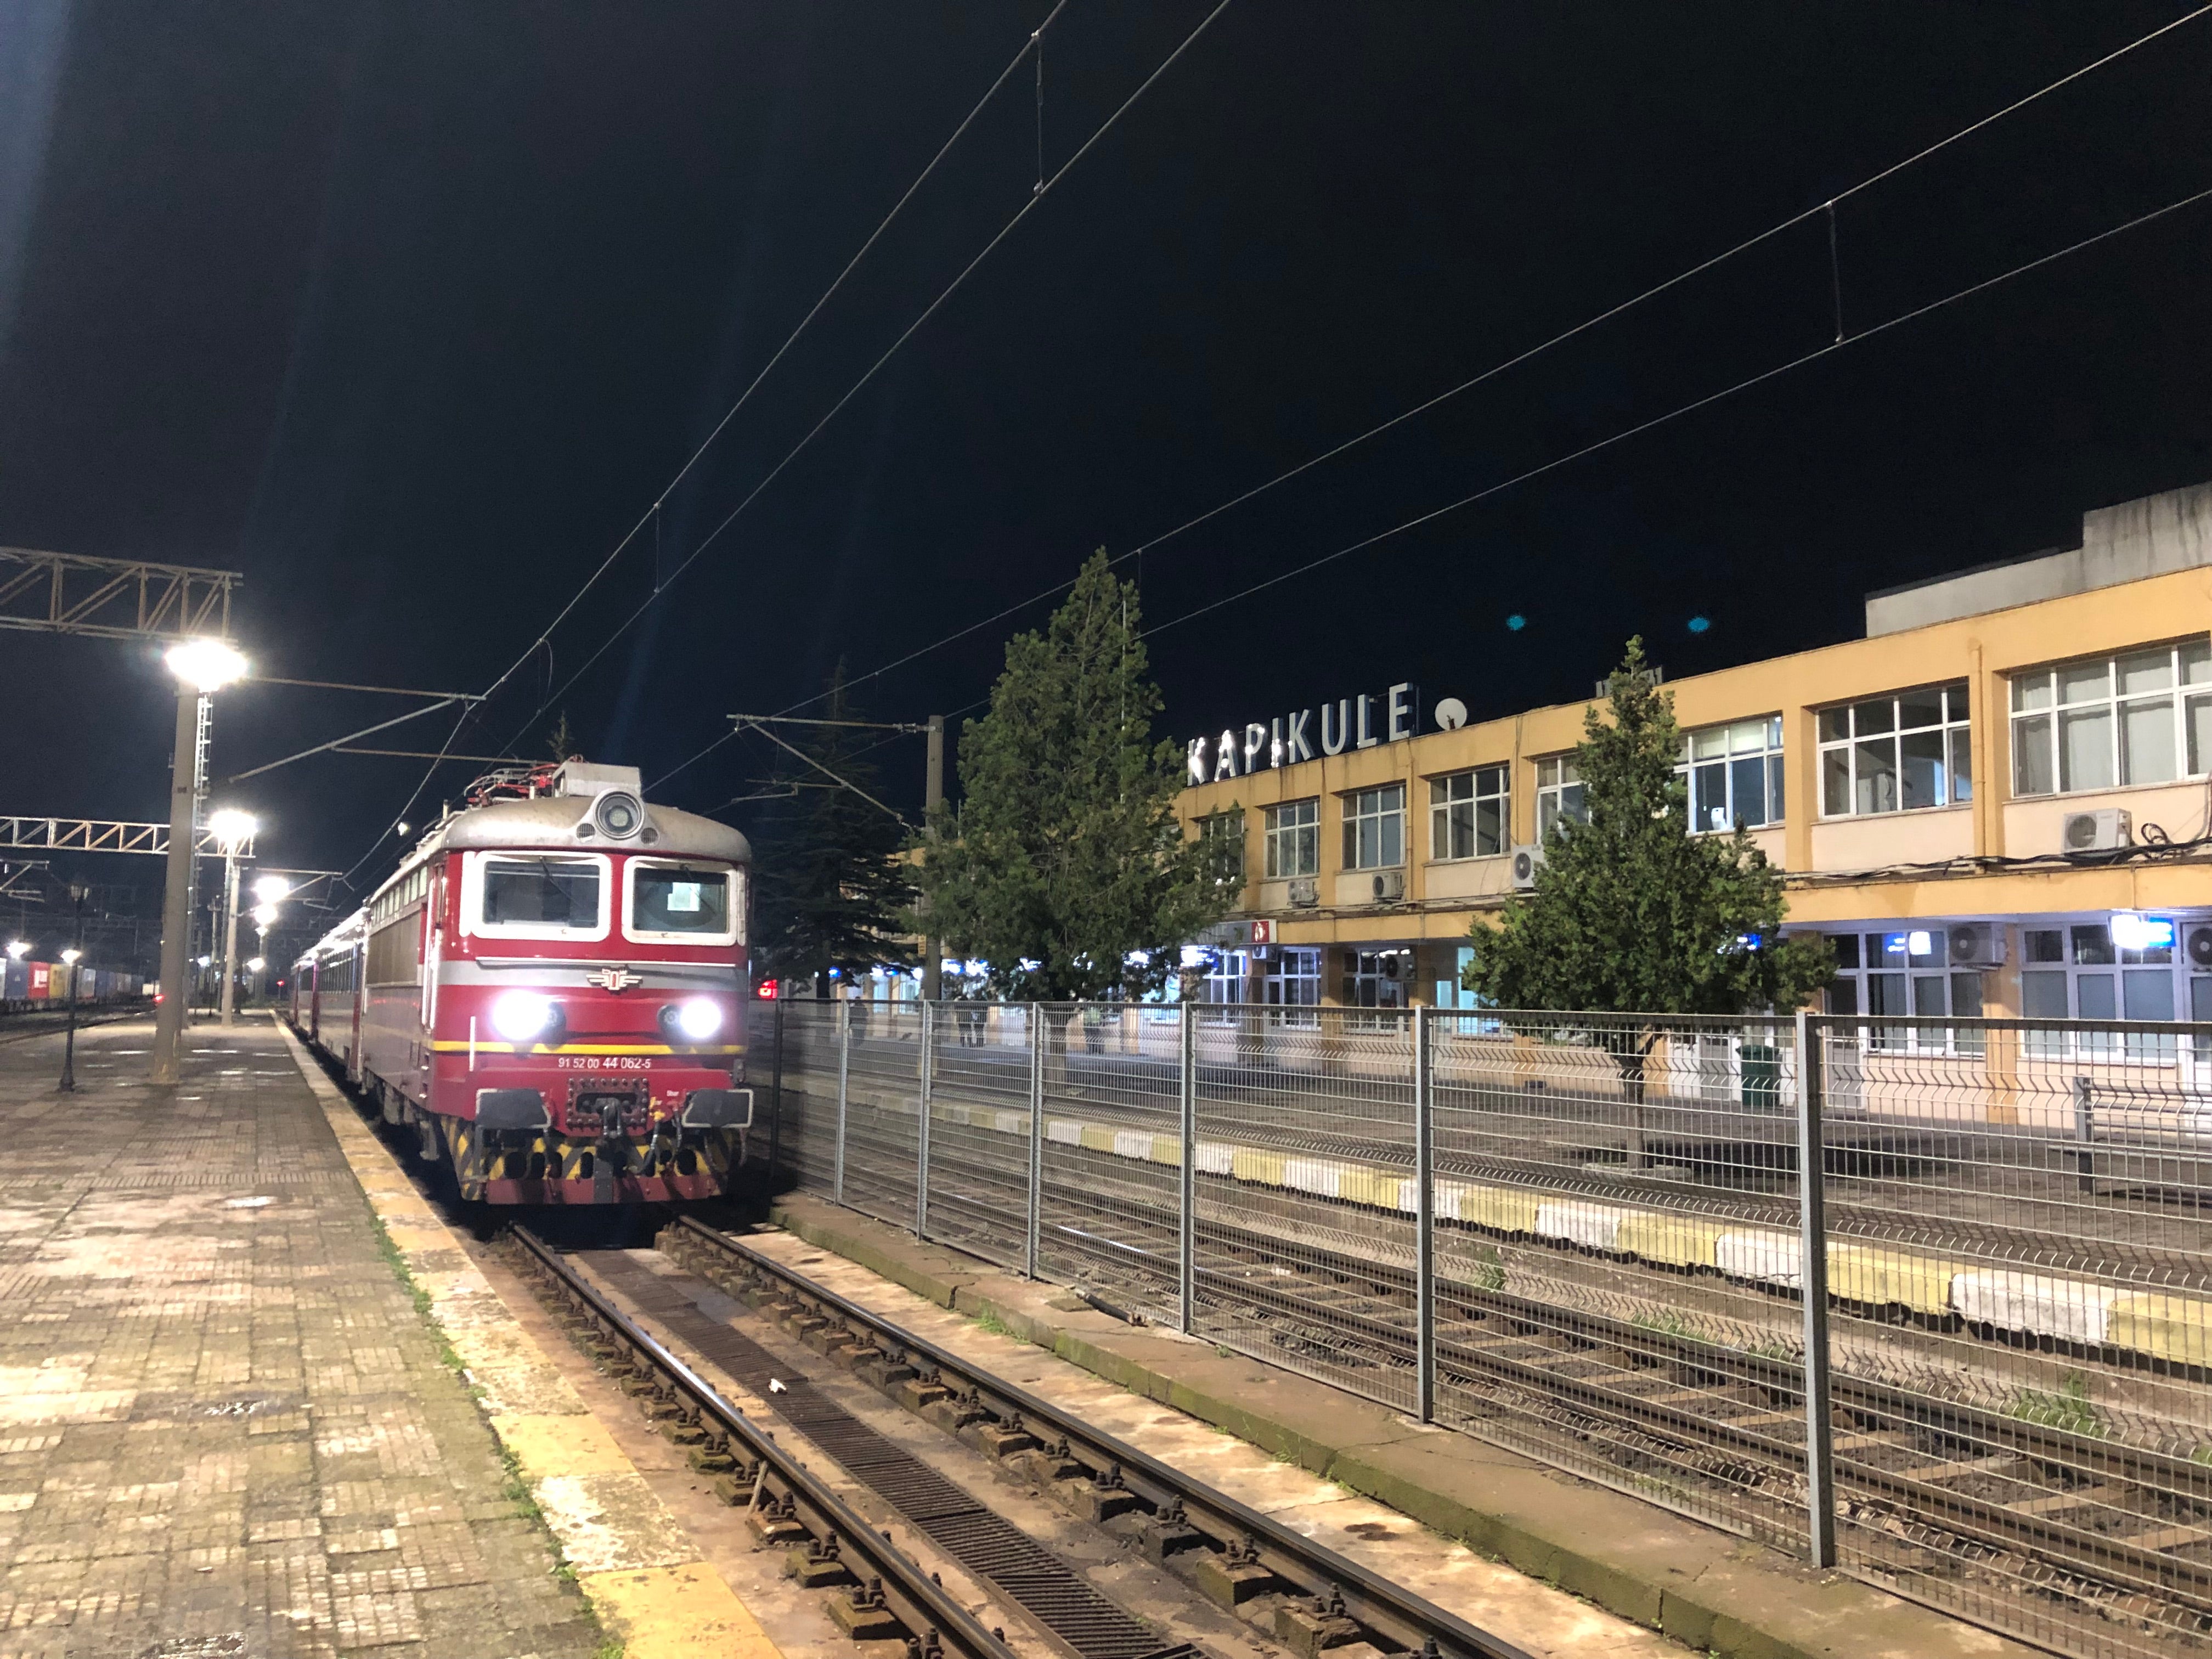 Catching a night train in Europe